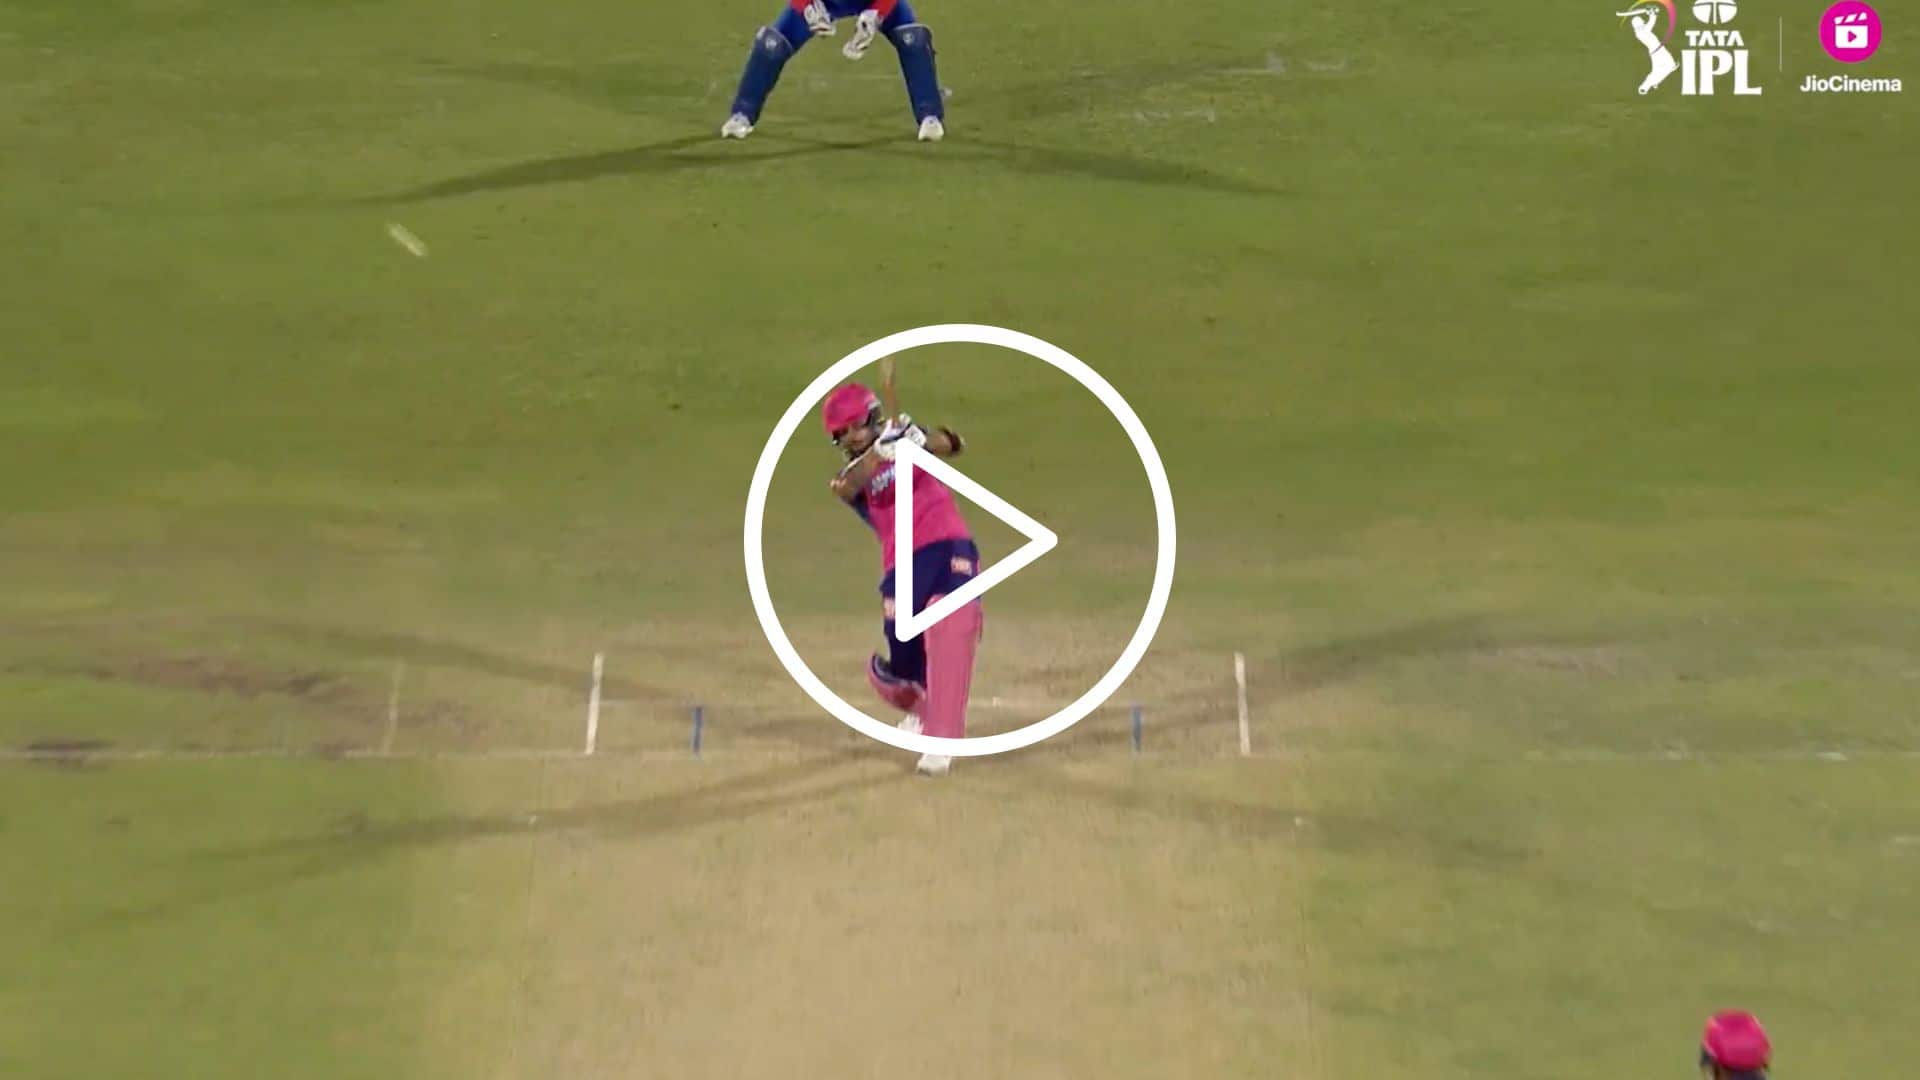 [Watch] 4,4,6,4,6! Riyan Parag's Last-Over Onslaught Traumatises Anrich Nortje